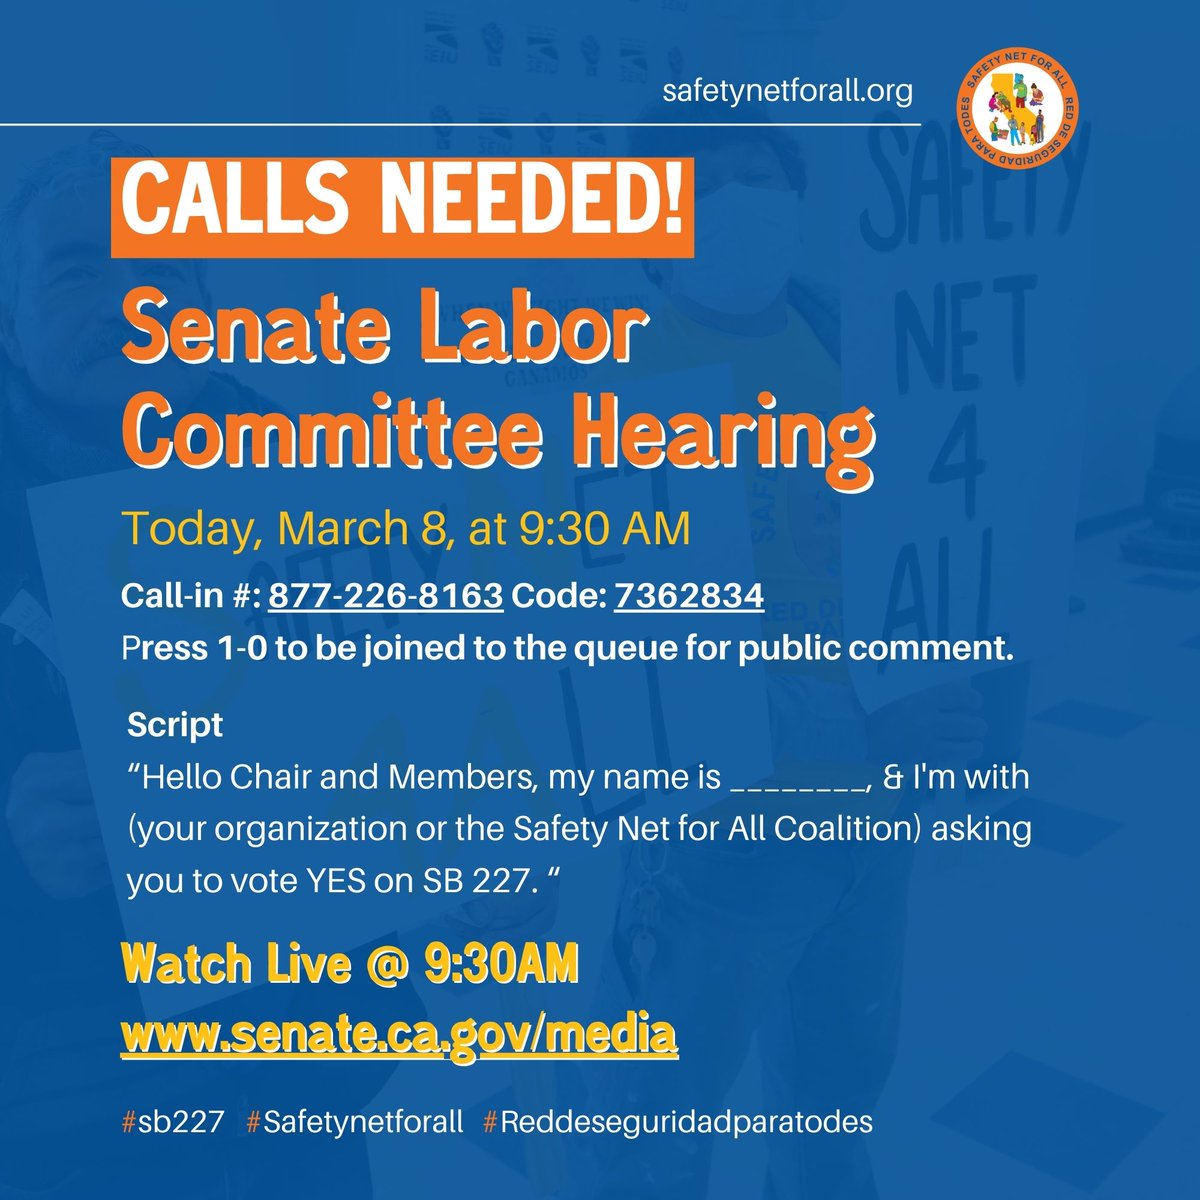 You still have time to tell the Senate Labor Committee to vote YES on #SB227 #SafetyNetforAll Workers! Undocumented workers sustain our state economy. We must provide unemployment benefits for all! 

Hearing is happening now!